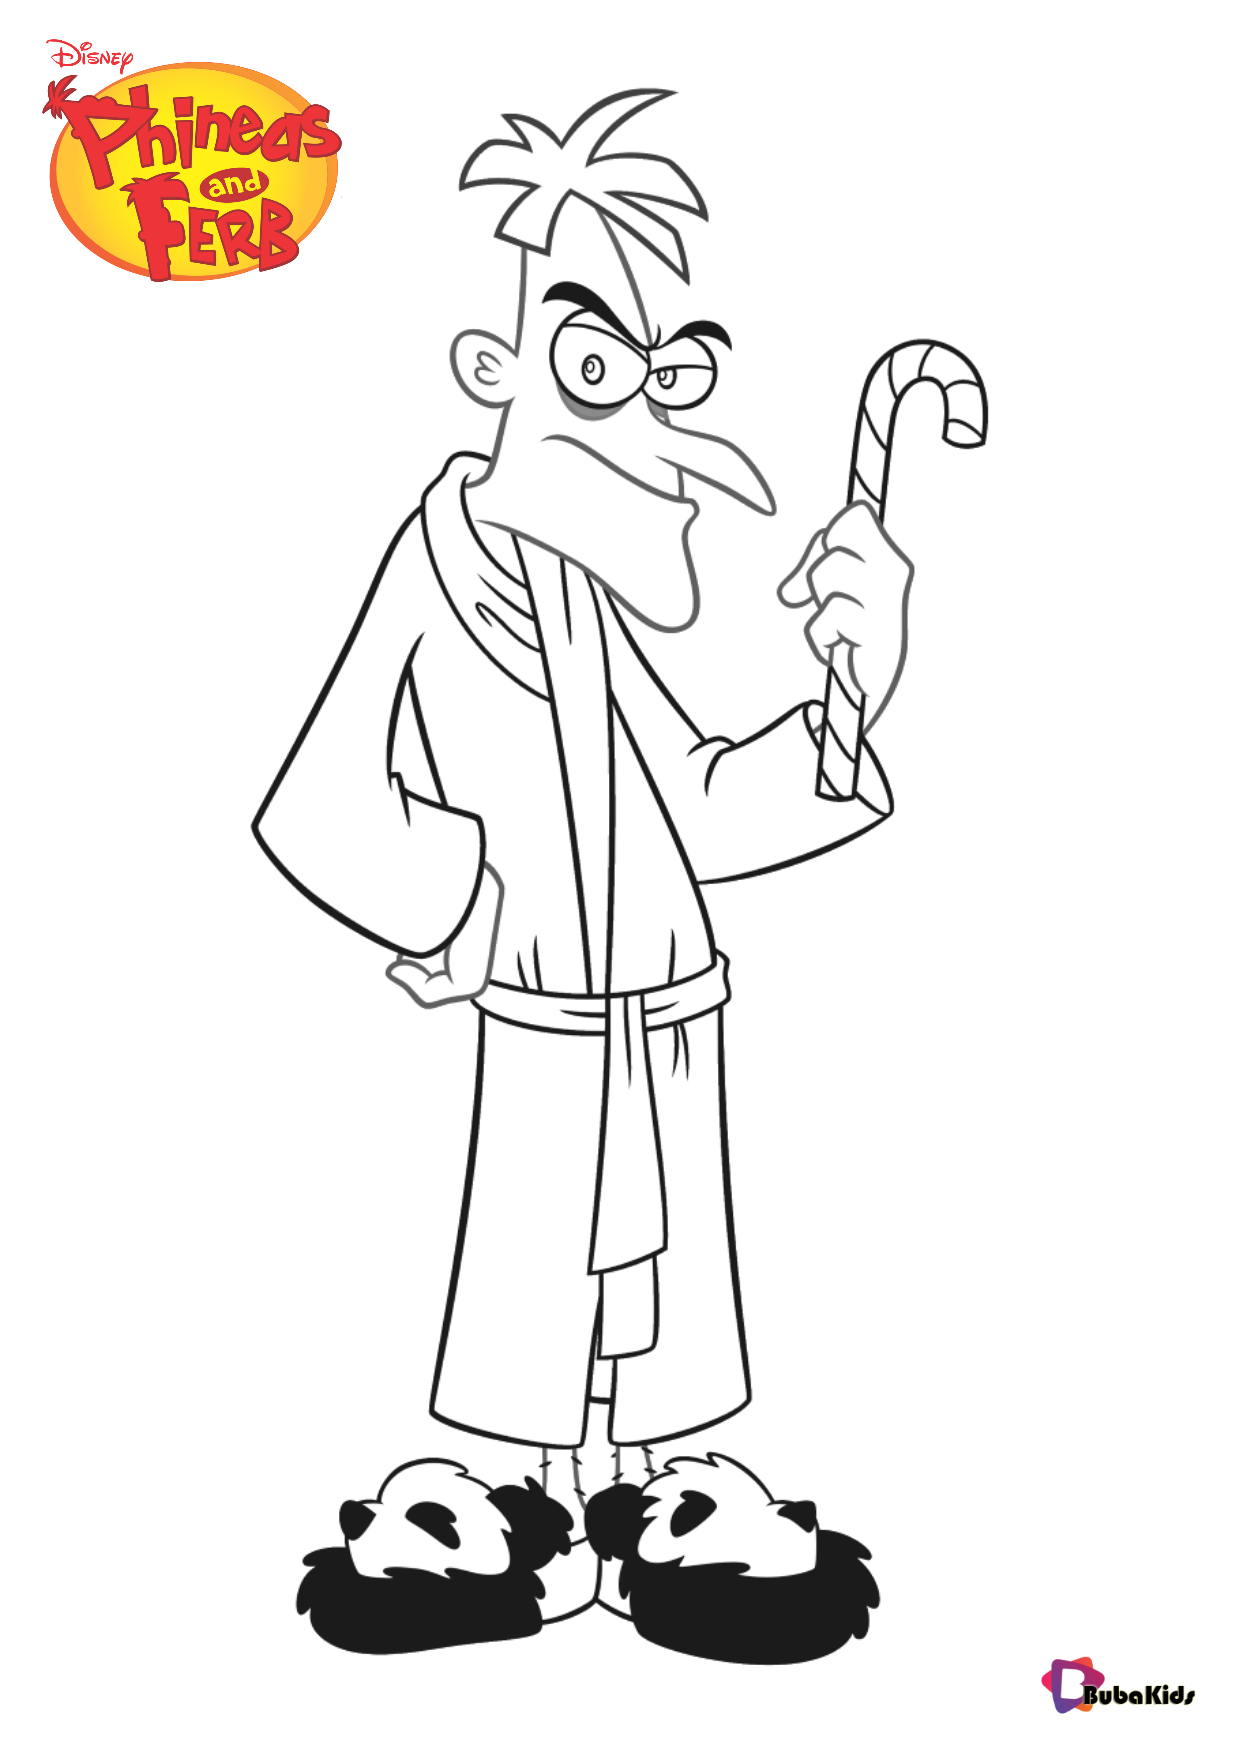 Dr Heinz doof Doofenshmirtz coloring Phineas and Ferb coloring pages Wallpaper